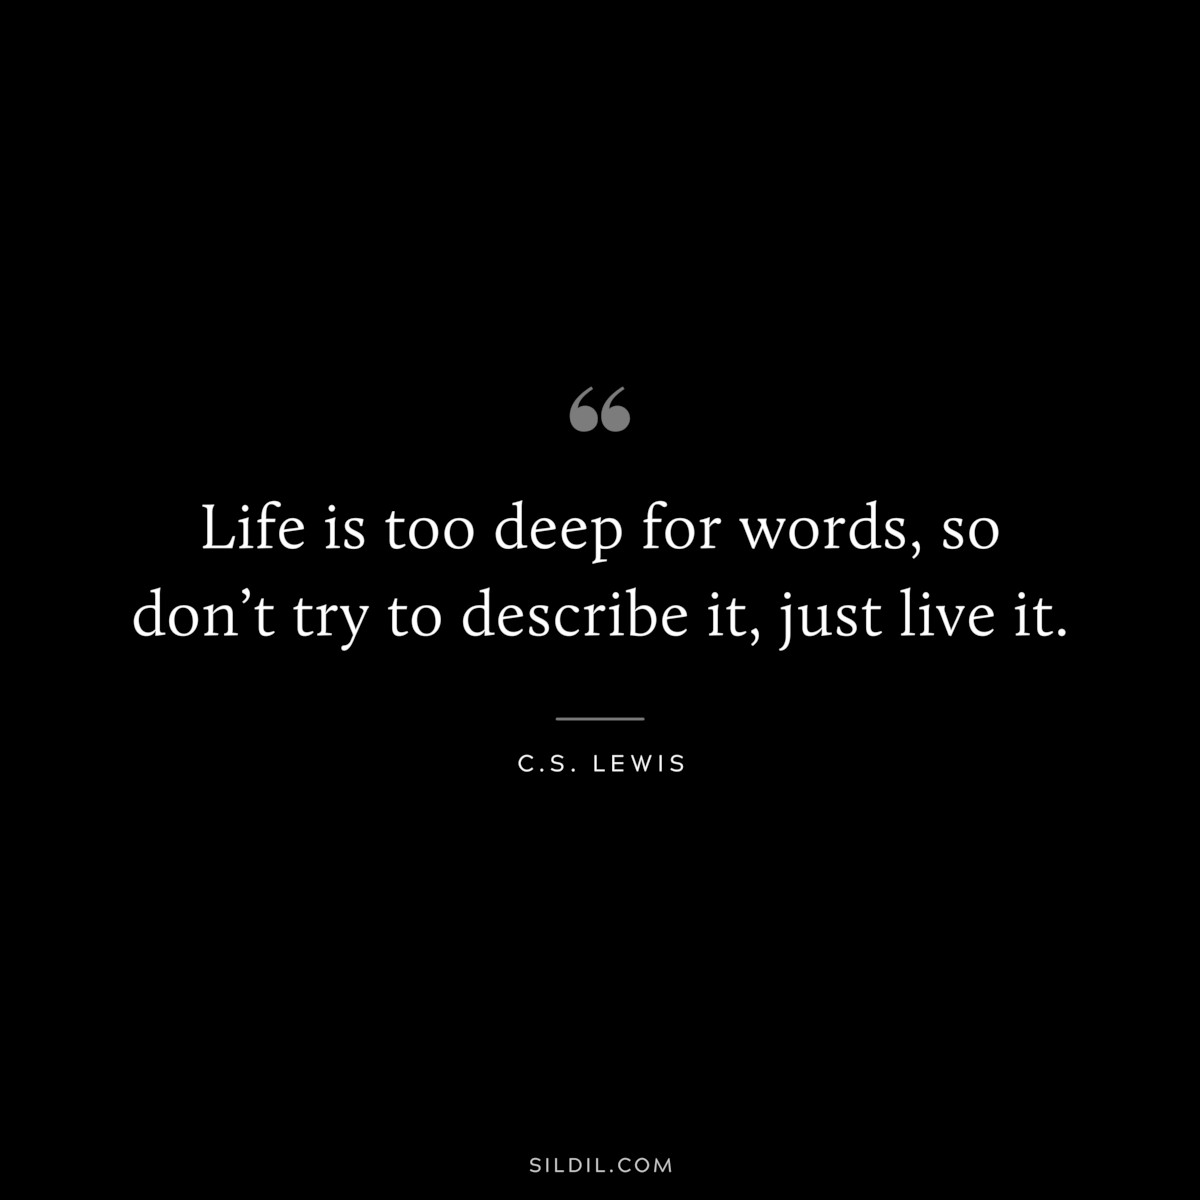 Life is too deep for words, so don’t try to describe it, just live it. ― C.S. Lewis